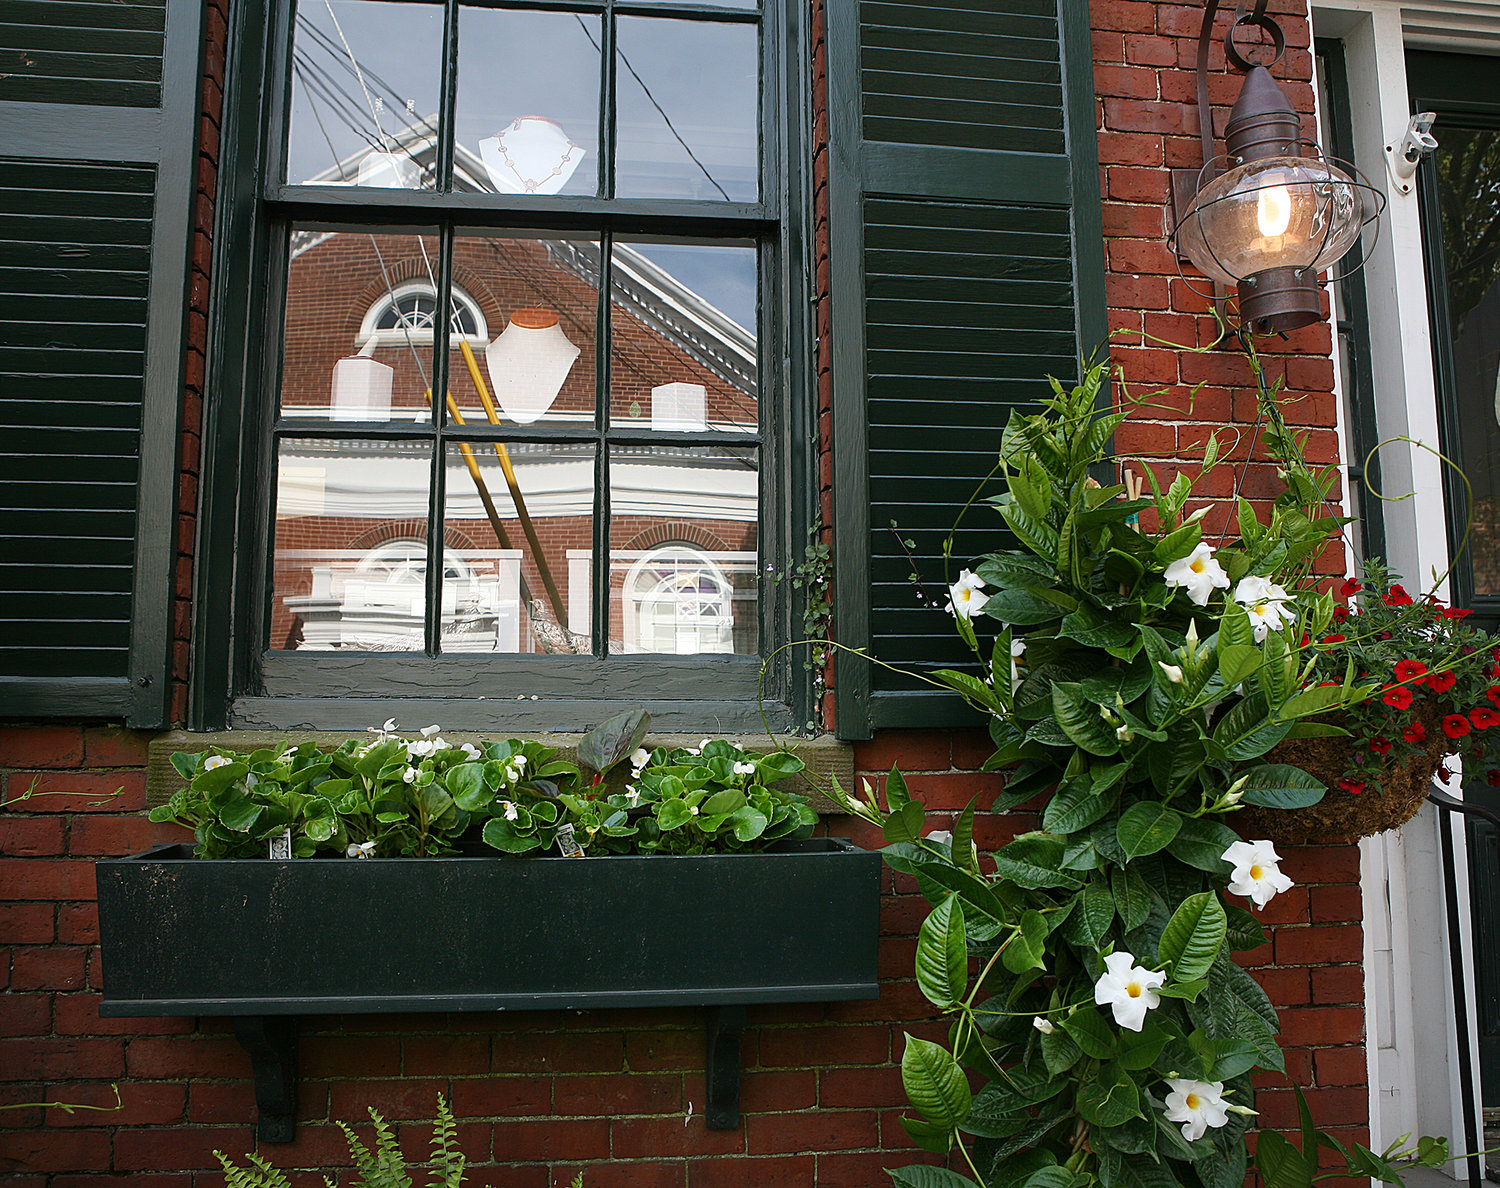 MAY 23, 2021 -- A window box and other flowers outside Nantucket Estate Jewelry and Fine Arts on Orange Street.